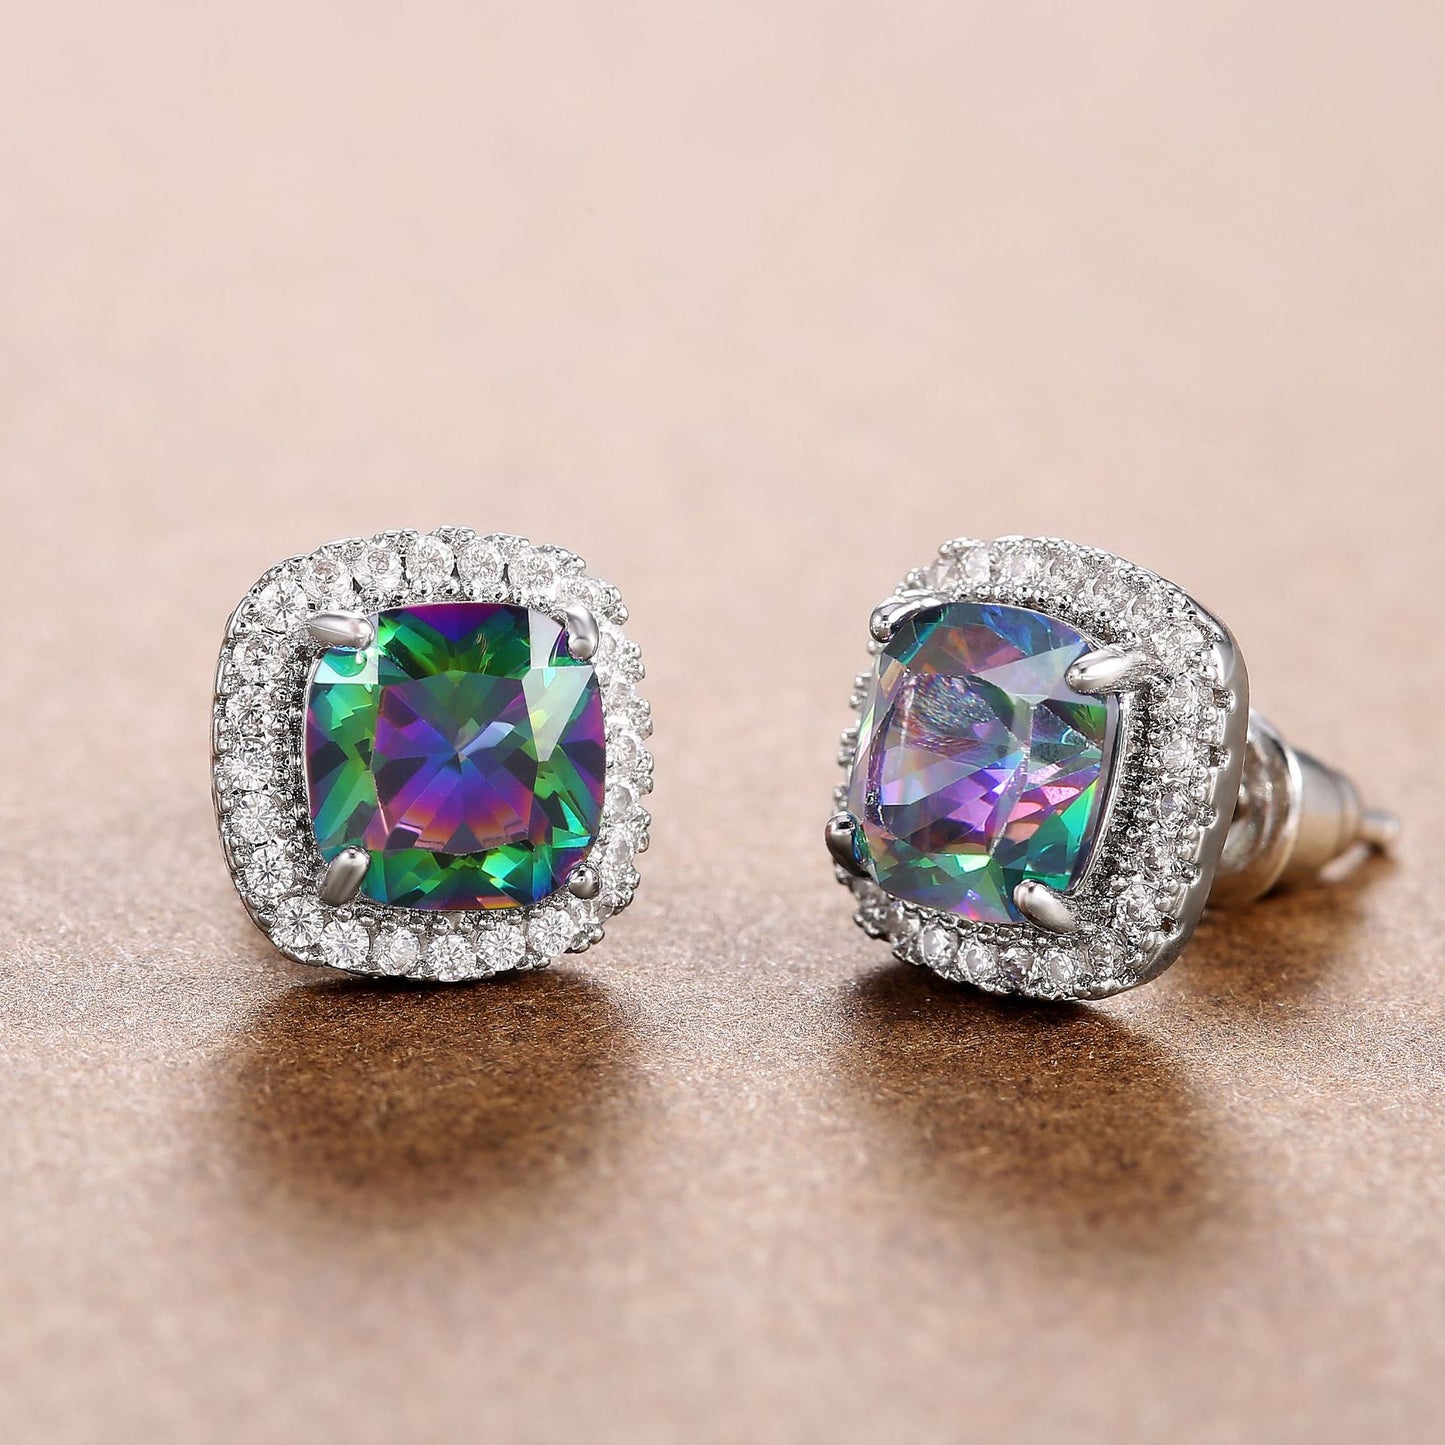 Square  Mystic Topaz  and  Cubic Zirconia   AAA  Post Back   Earrings